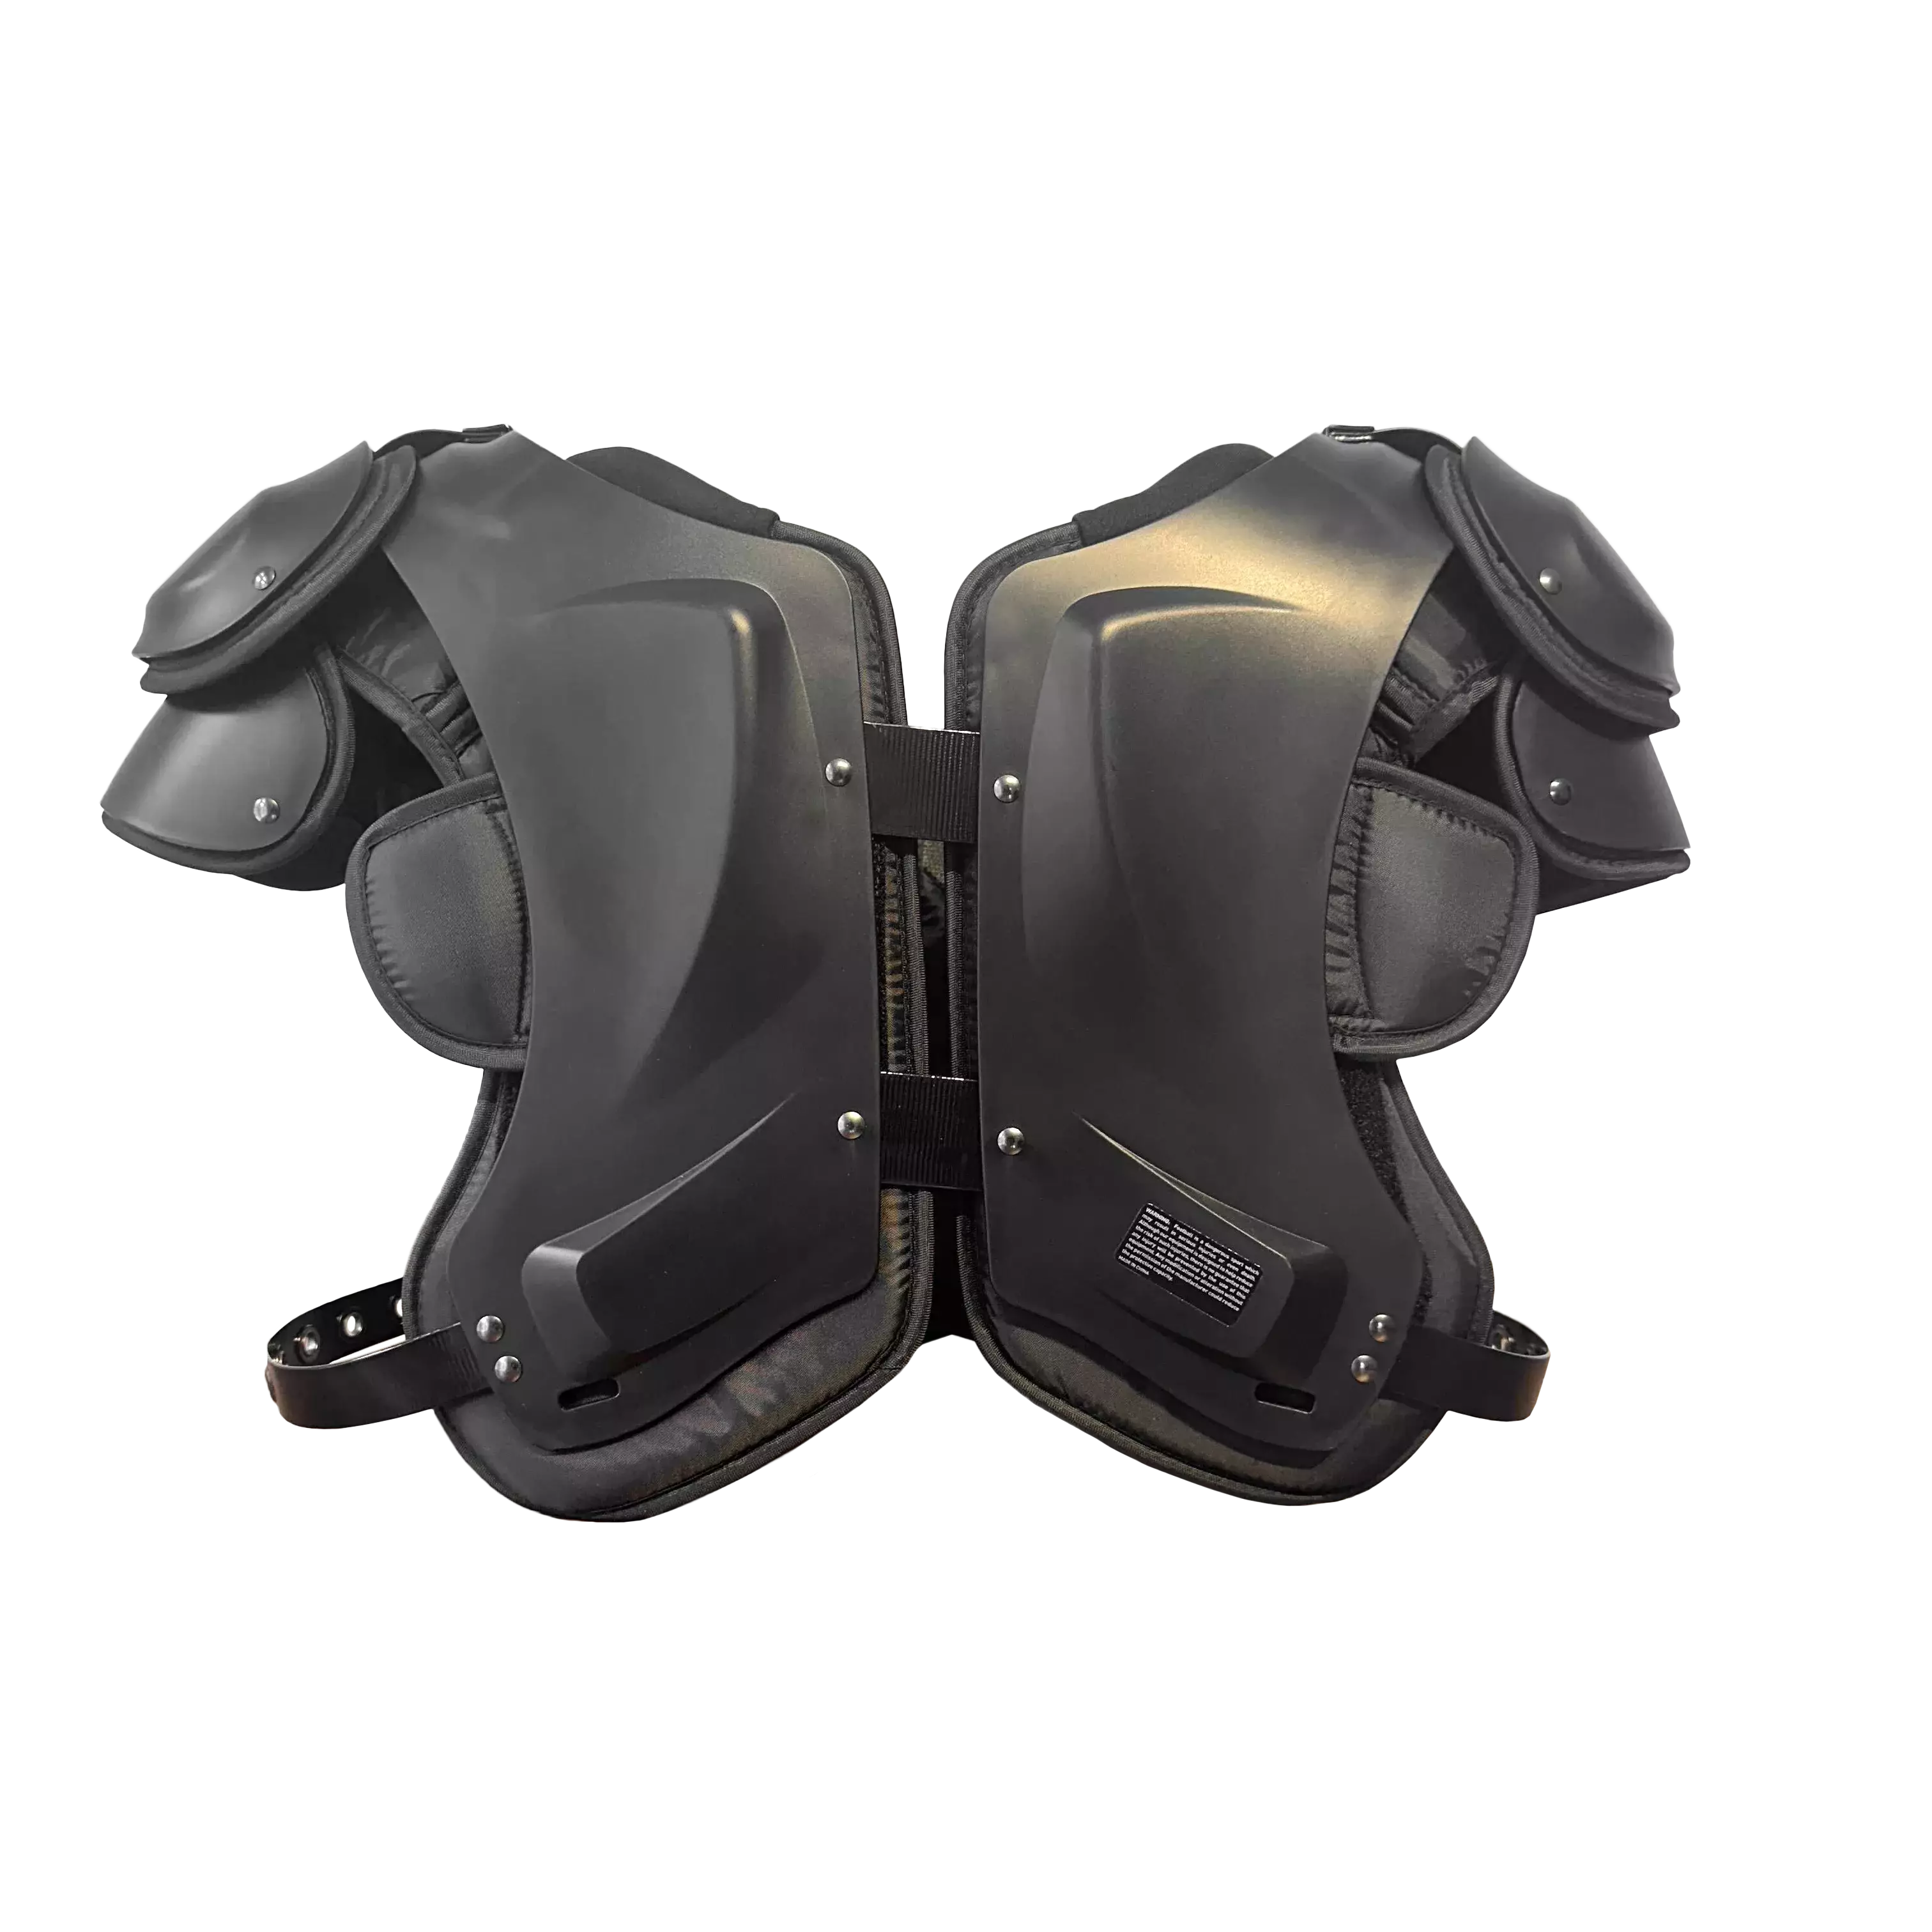 Backside view of Velocity 2 shoulder pads.